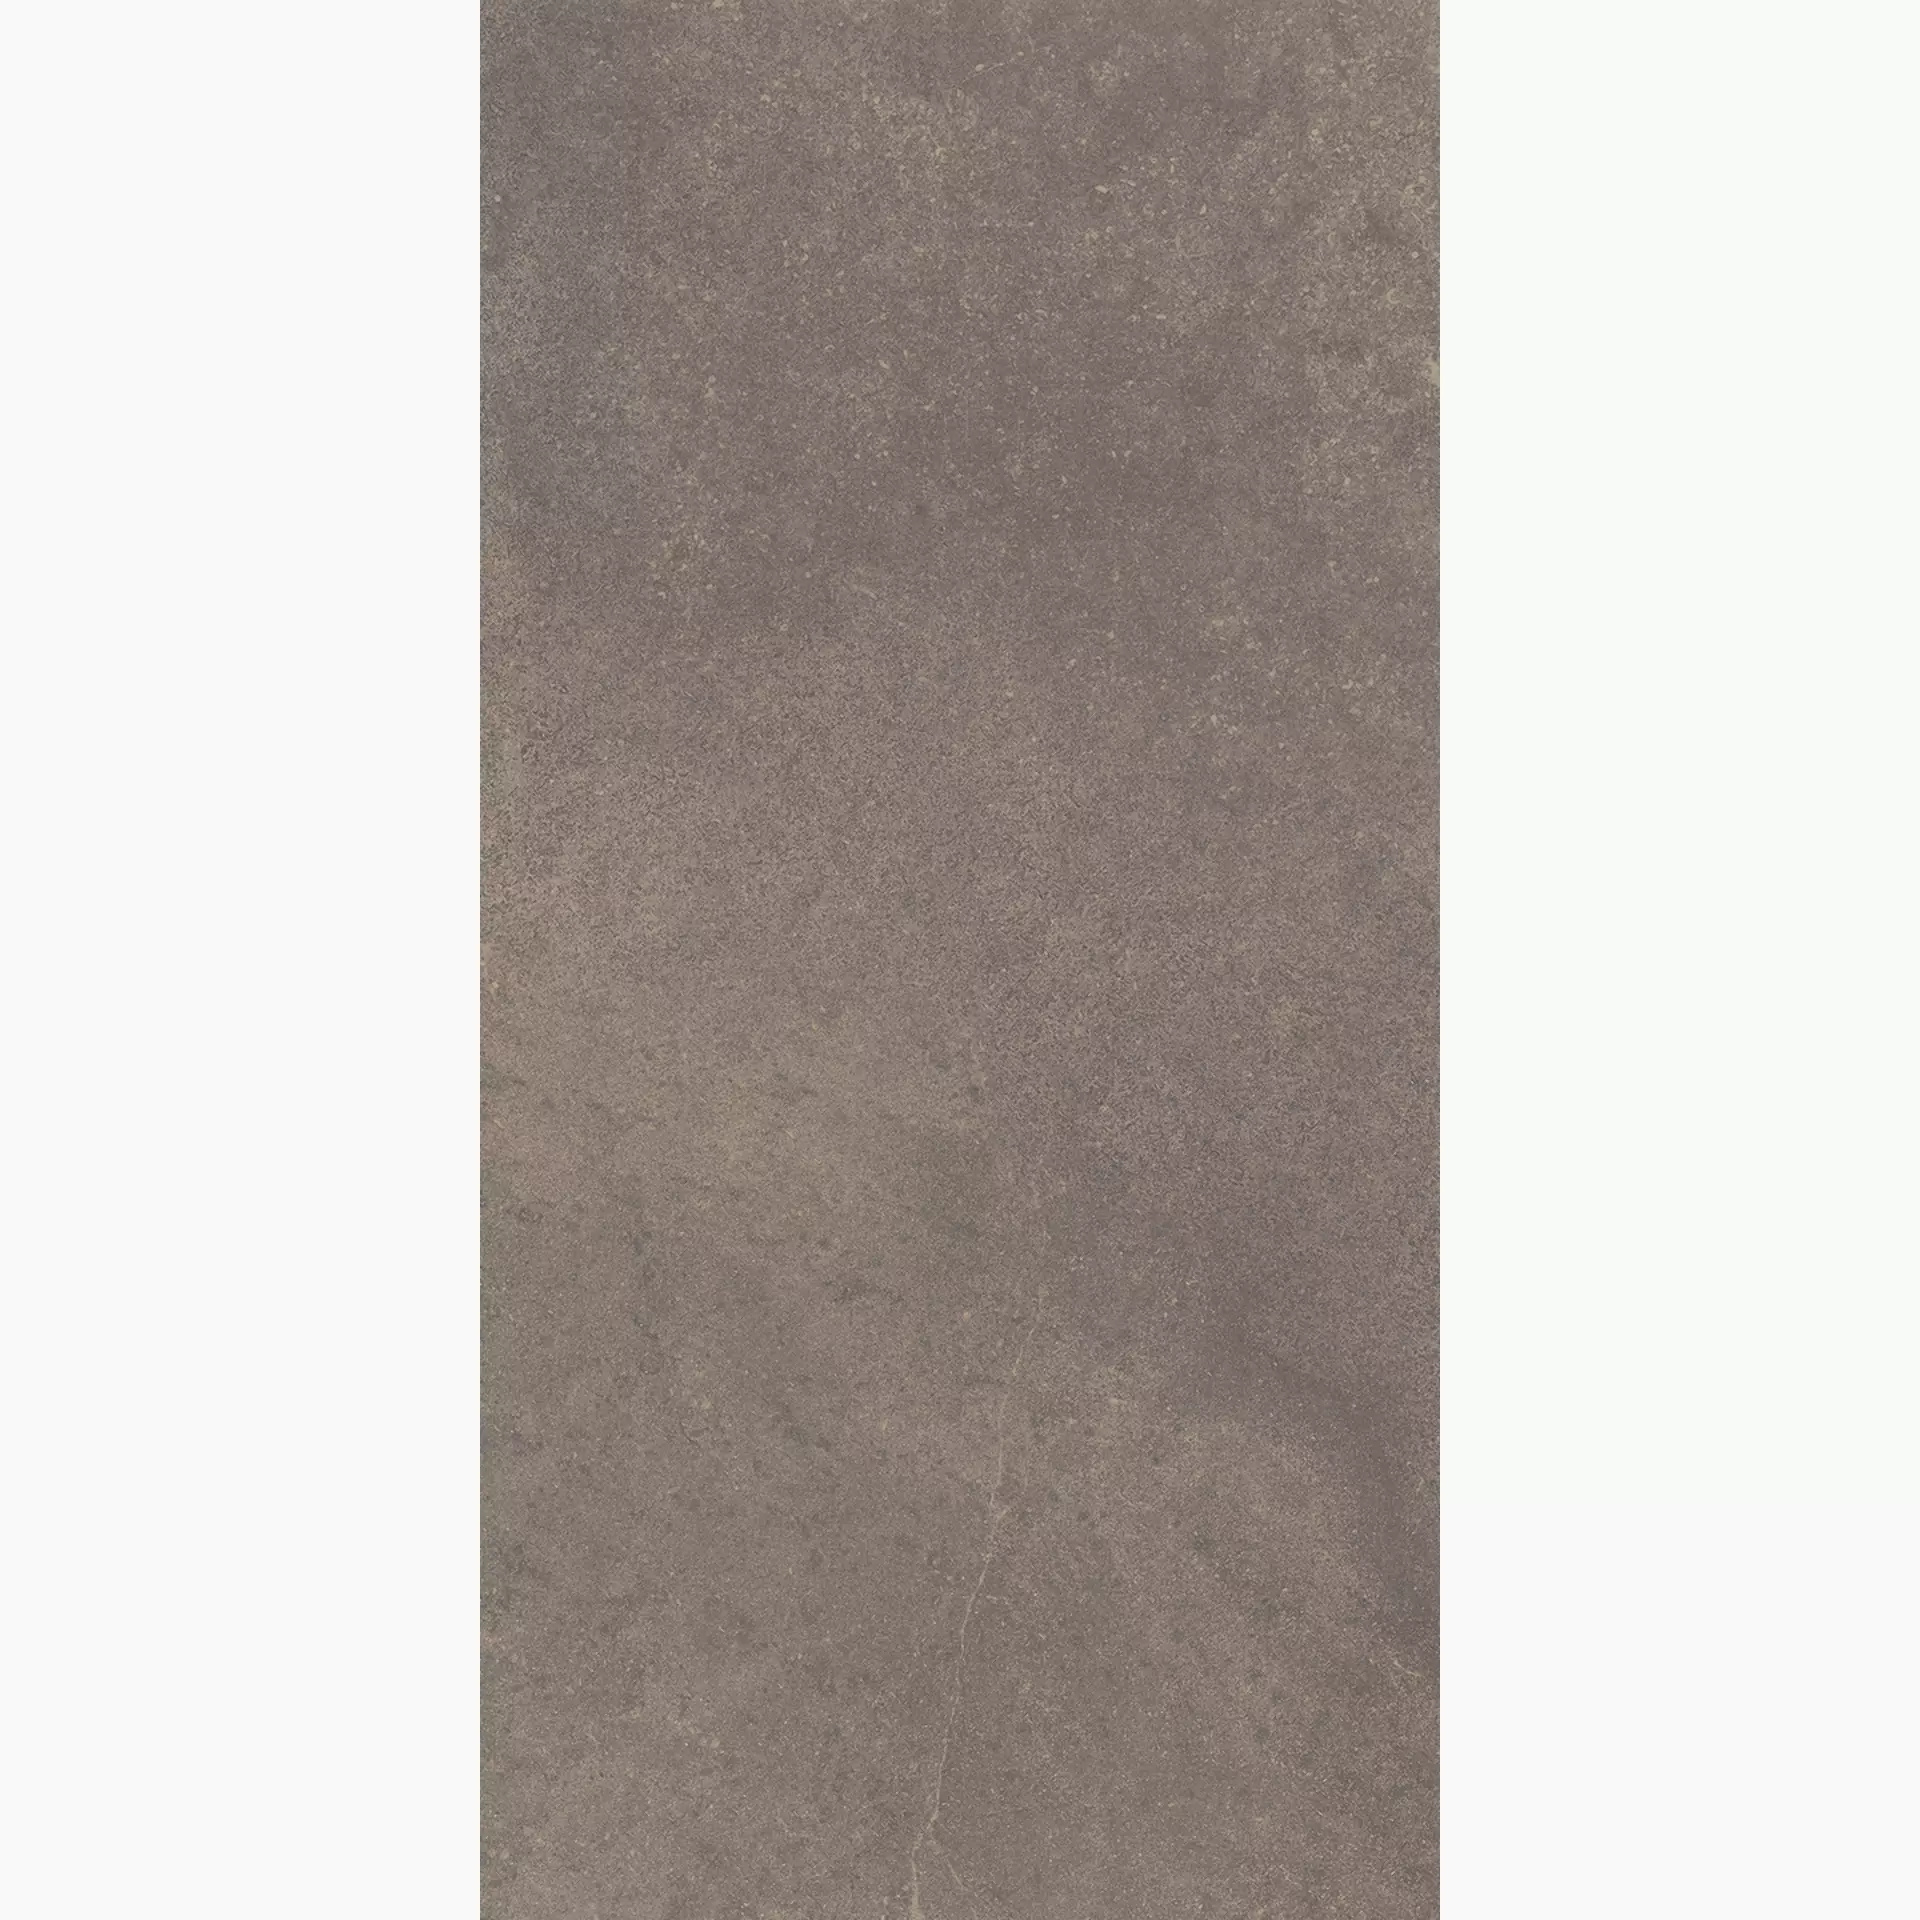 Fondovalle Planeto Mars Natural PNT269 60x120cm rectified 8,5mm